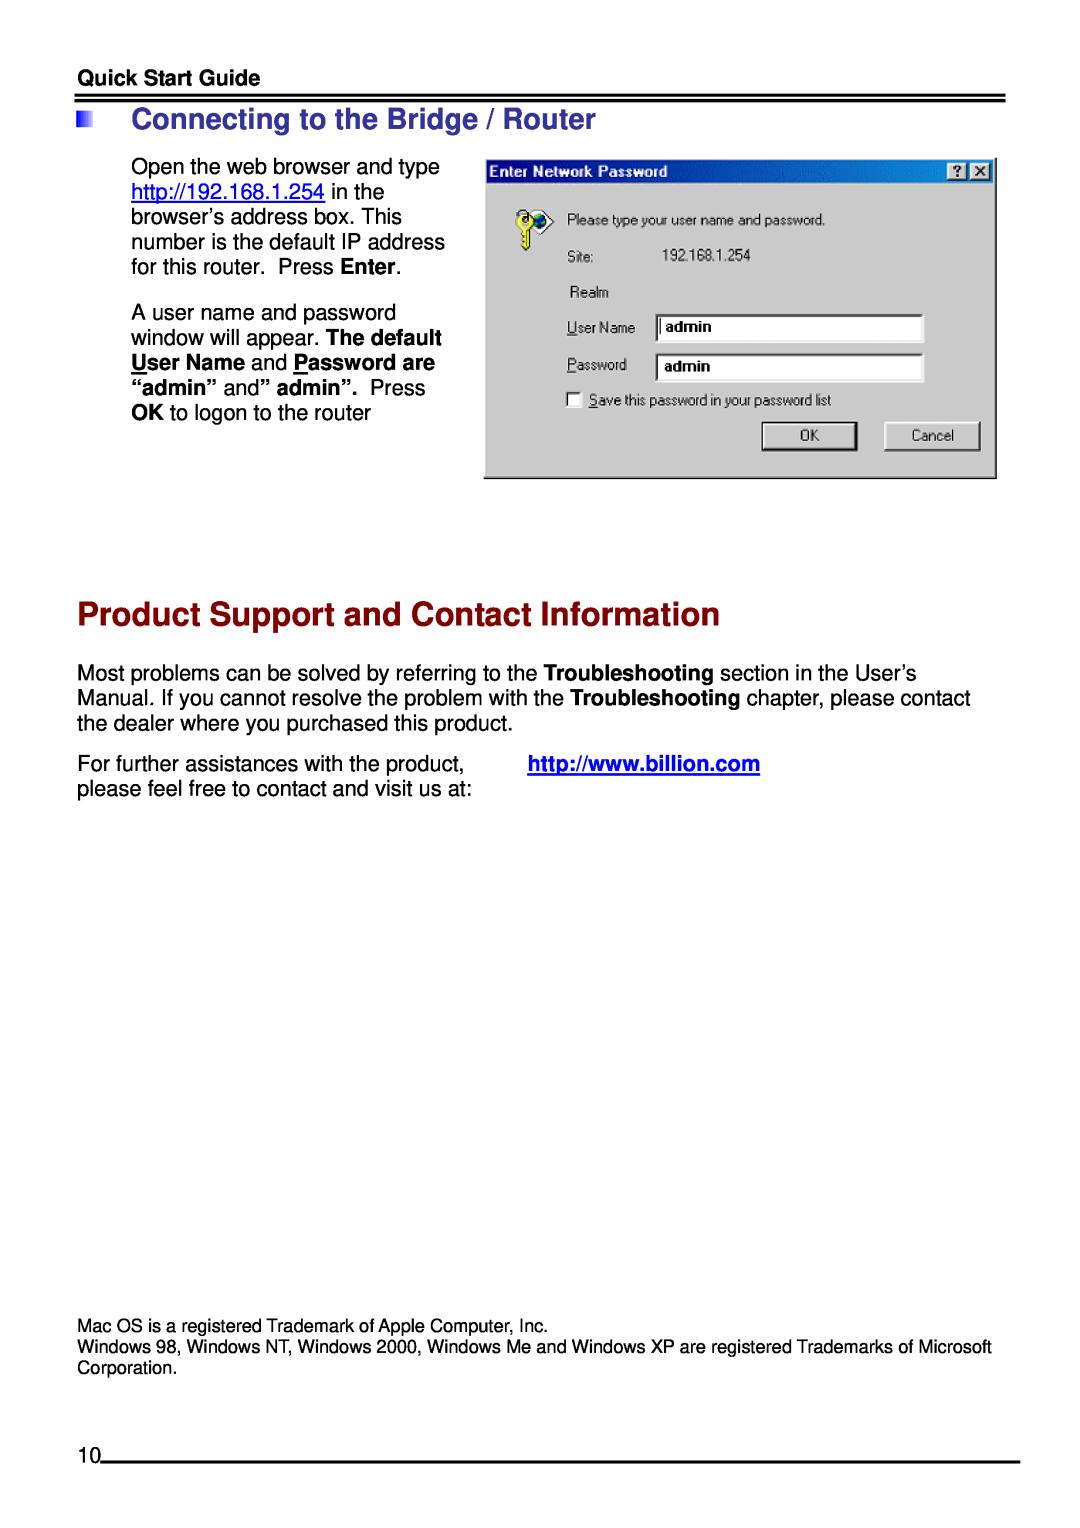 Billion Electric Company 8520 quick start Product Support and Contact Information, Connecting to the Bridge / Router 